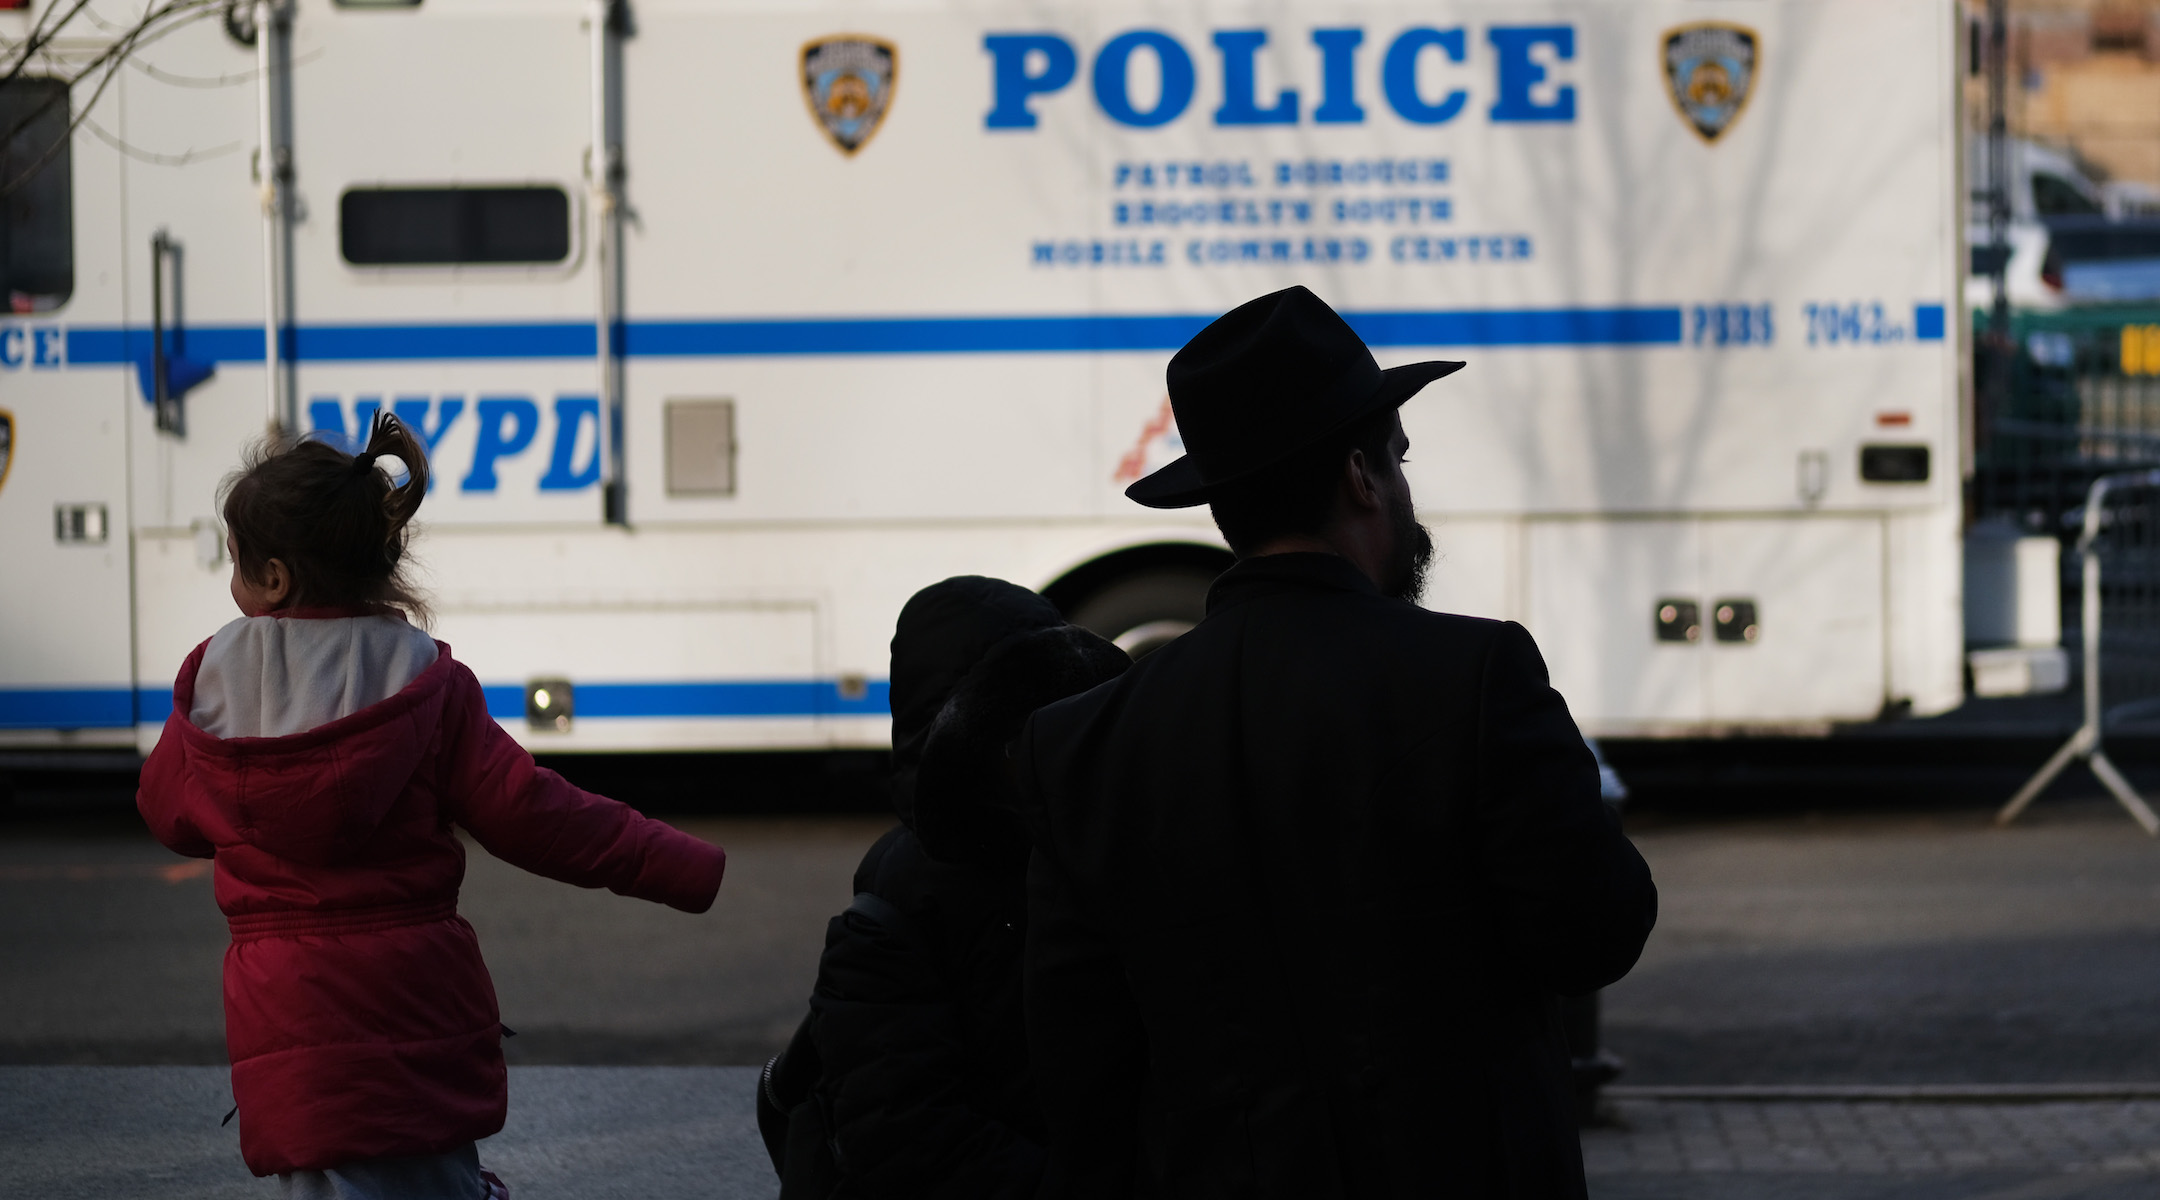 A man and girl in the Crown Heights neighborhood of Brooklyn stand opposite a police van on Dec. 31, 2019. Brooklyn was the location of more than one third of the total anti-Semitic assaults committed last year, according to the Anti-Defamation League. (Spencer Platt/Getty Images)